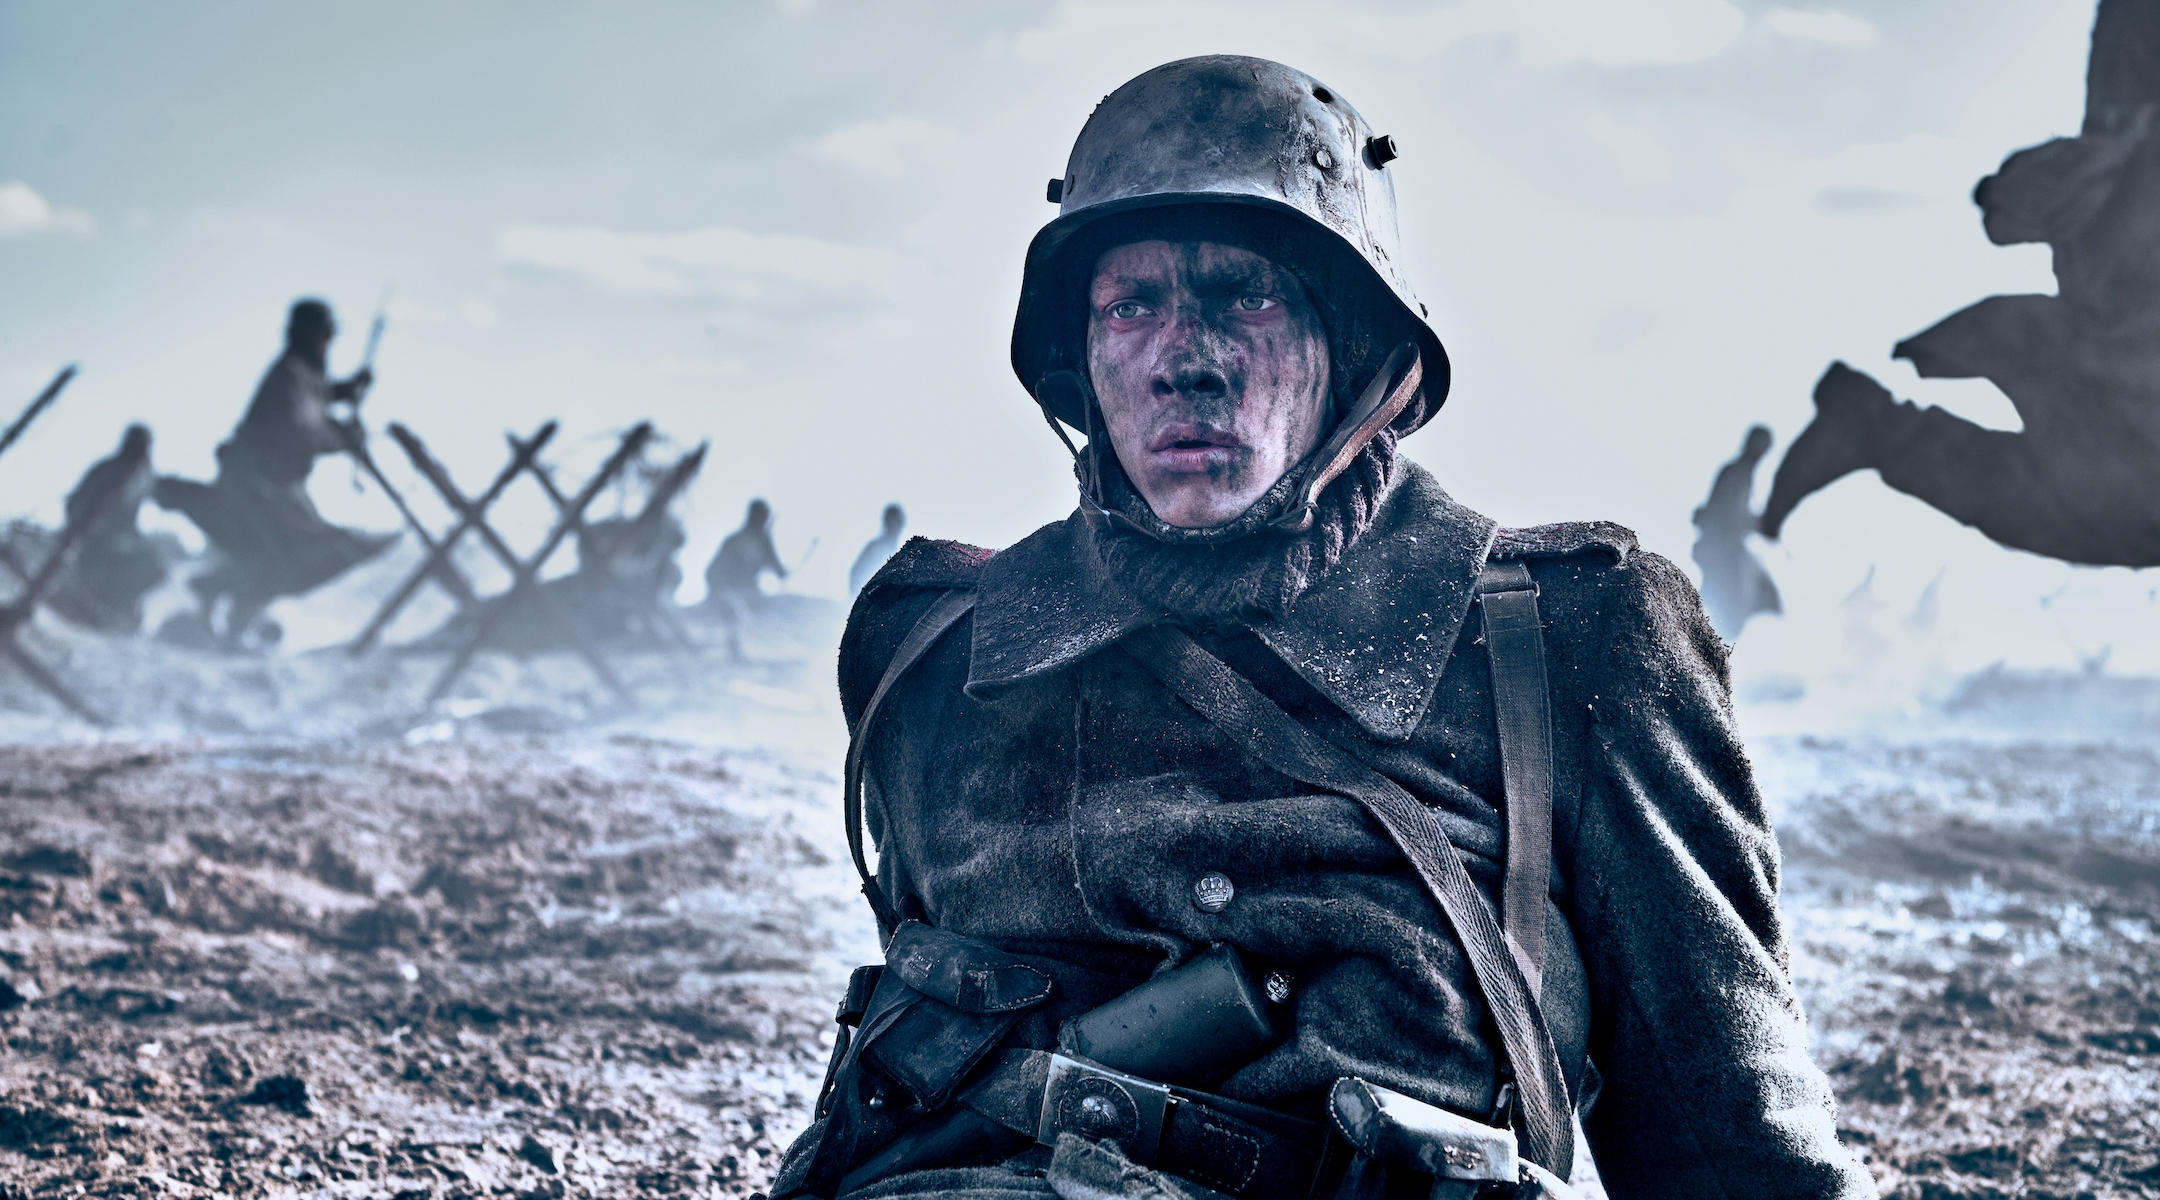 Austrian actor Felix Kammerer as Paul Bäumer, the protagonist of Netflix’s Oscar-nominated adaptation of “All Quiet on the Western Front.” (Reiner Bajo/Netflix)